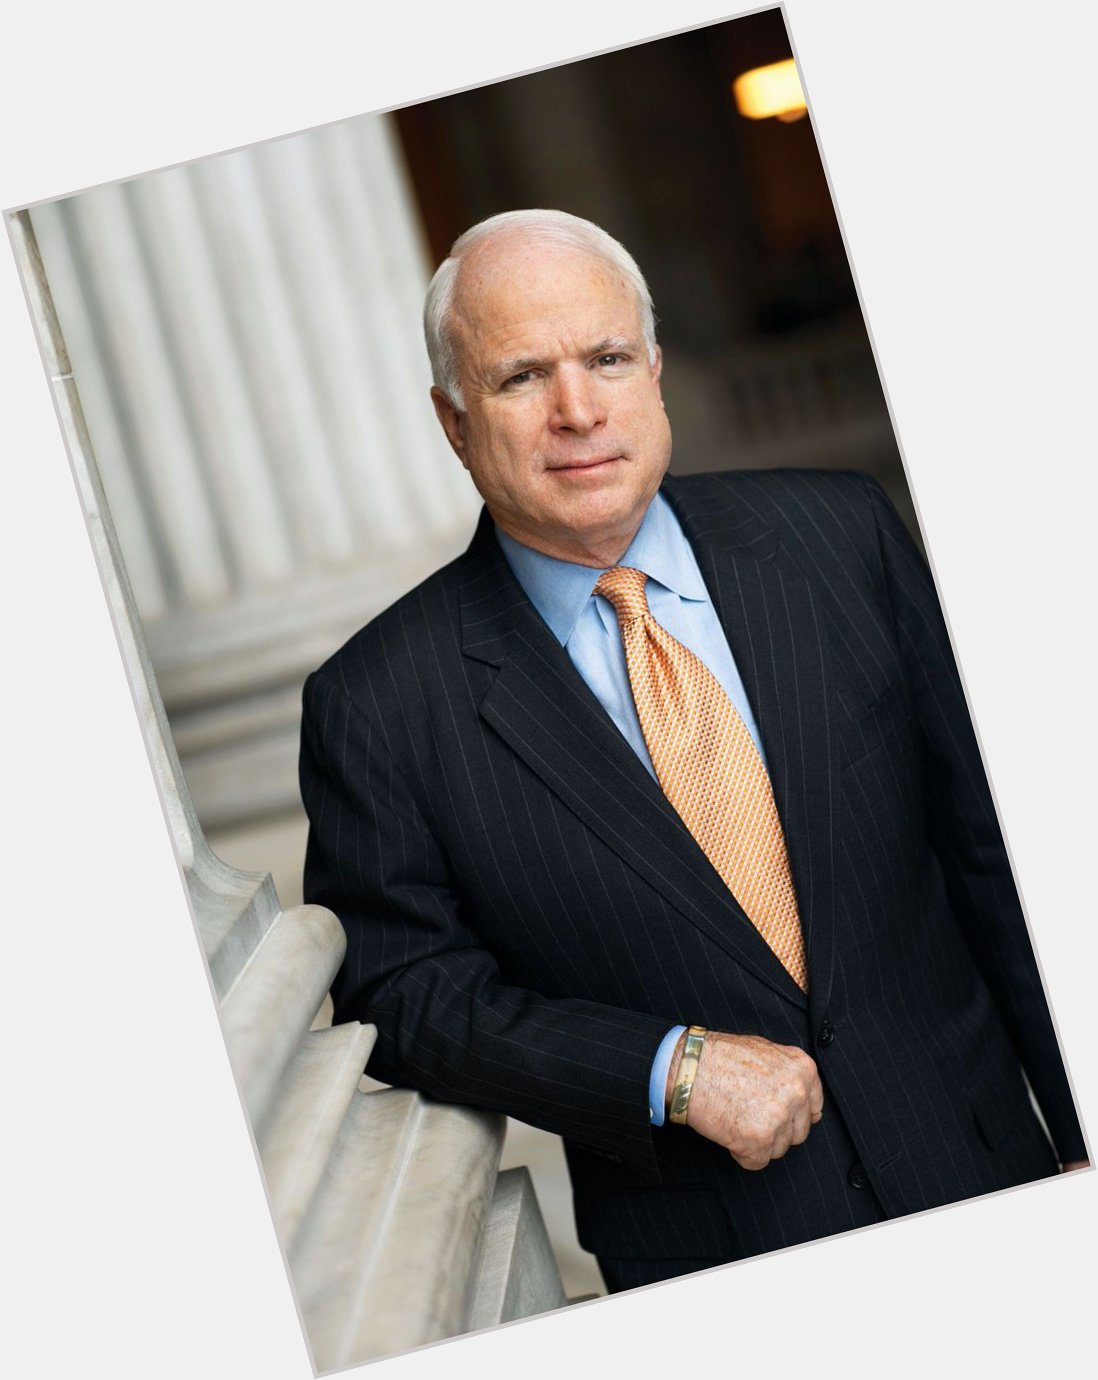 HAPPY BIRTHDAY TO THE LATE JOHN McCAIN WHO WOULD\VE TURNED 86 TODAY. 